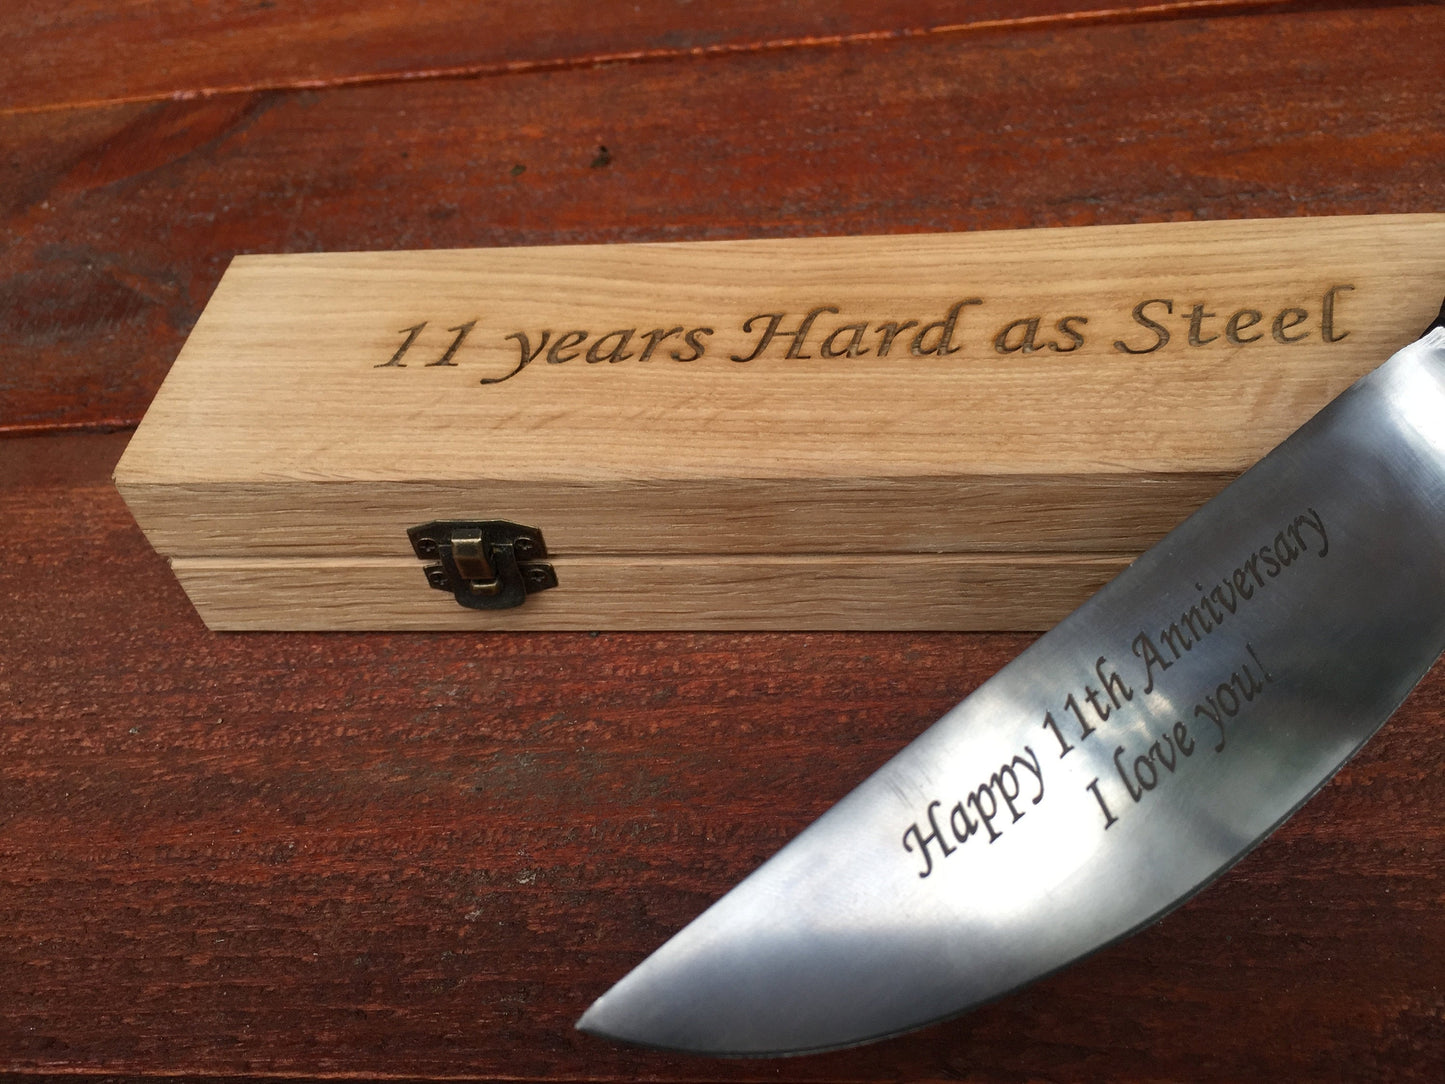 Steel gifts for him -11th anniversary, engraved steel gift, railroad spike knife, 11th anniversary gift for him, steel jewelry, steel gifts